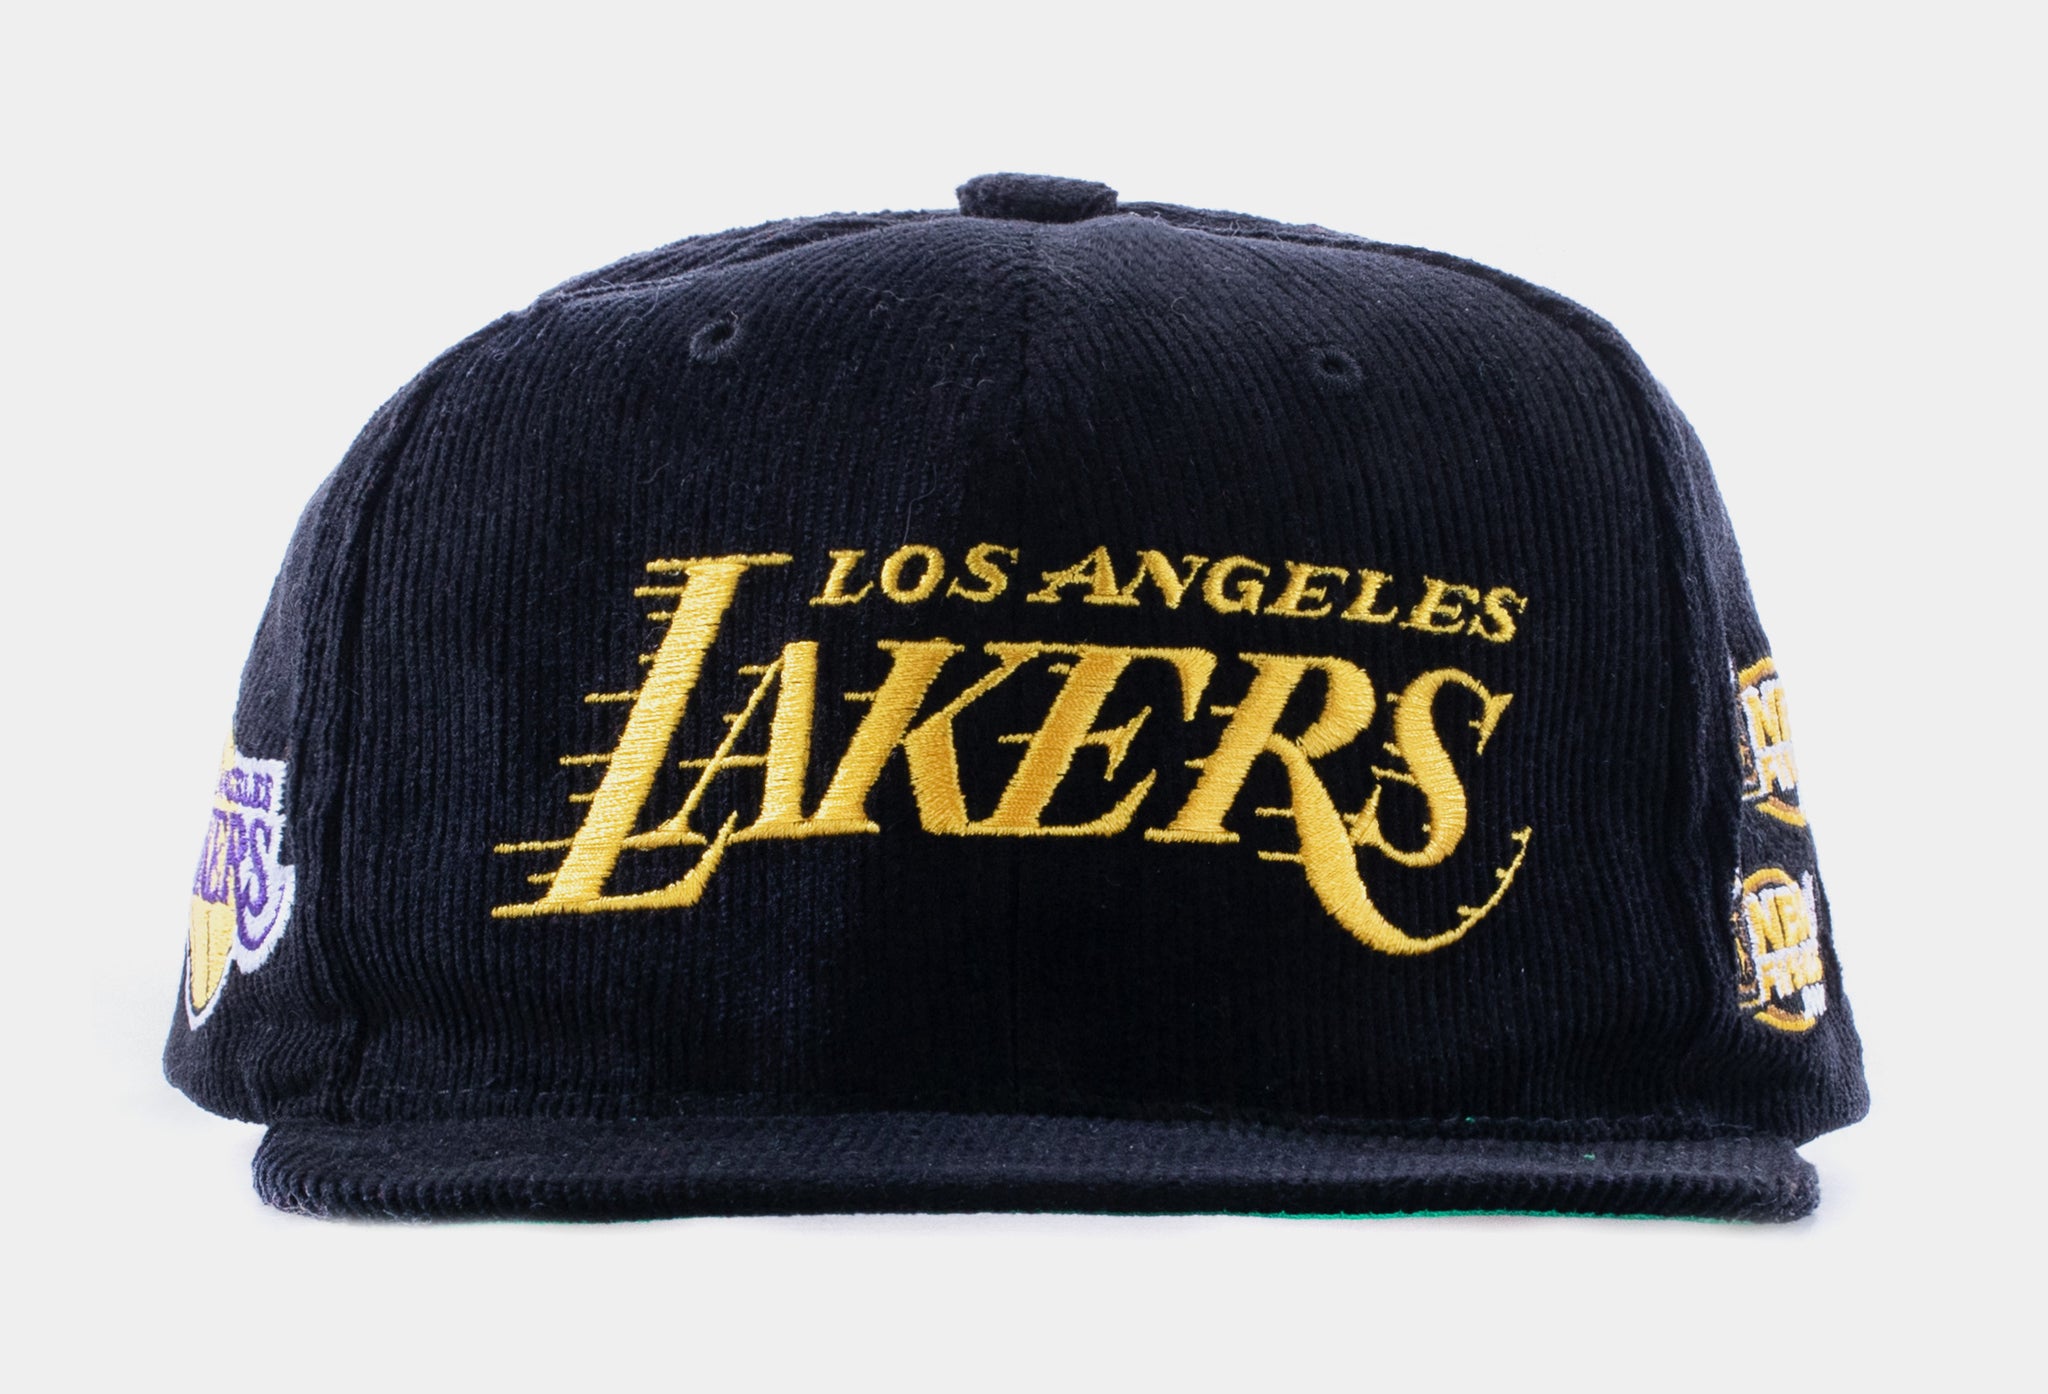 Mitchell & Ness- Los Angeles Lakers dad hat – Major Key Clothing Shop